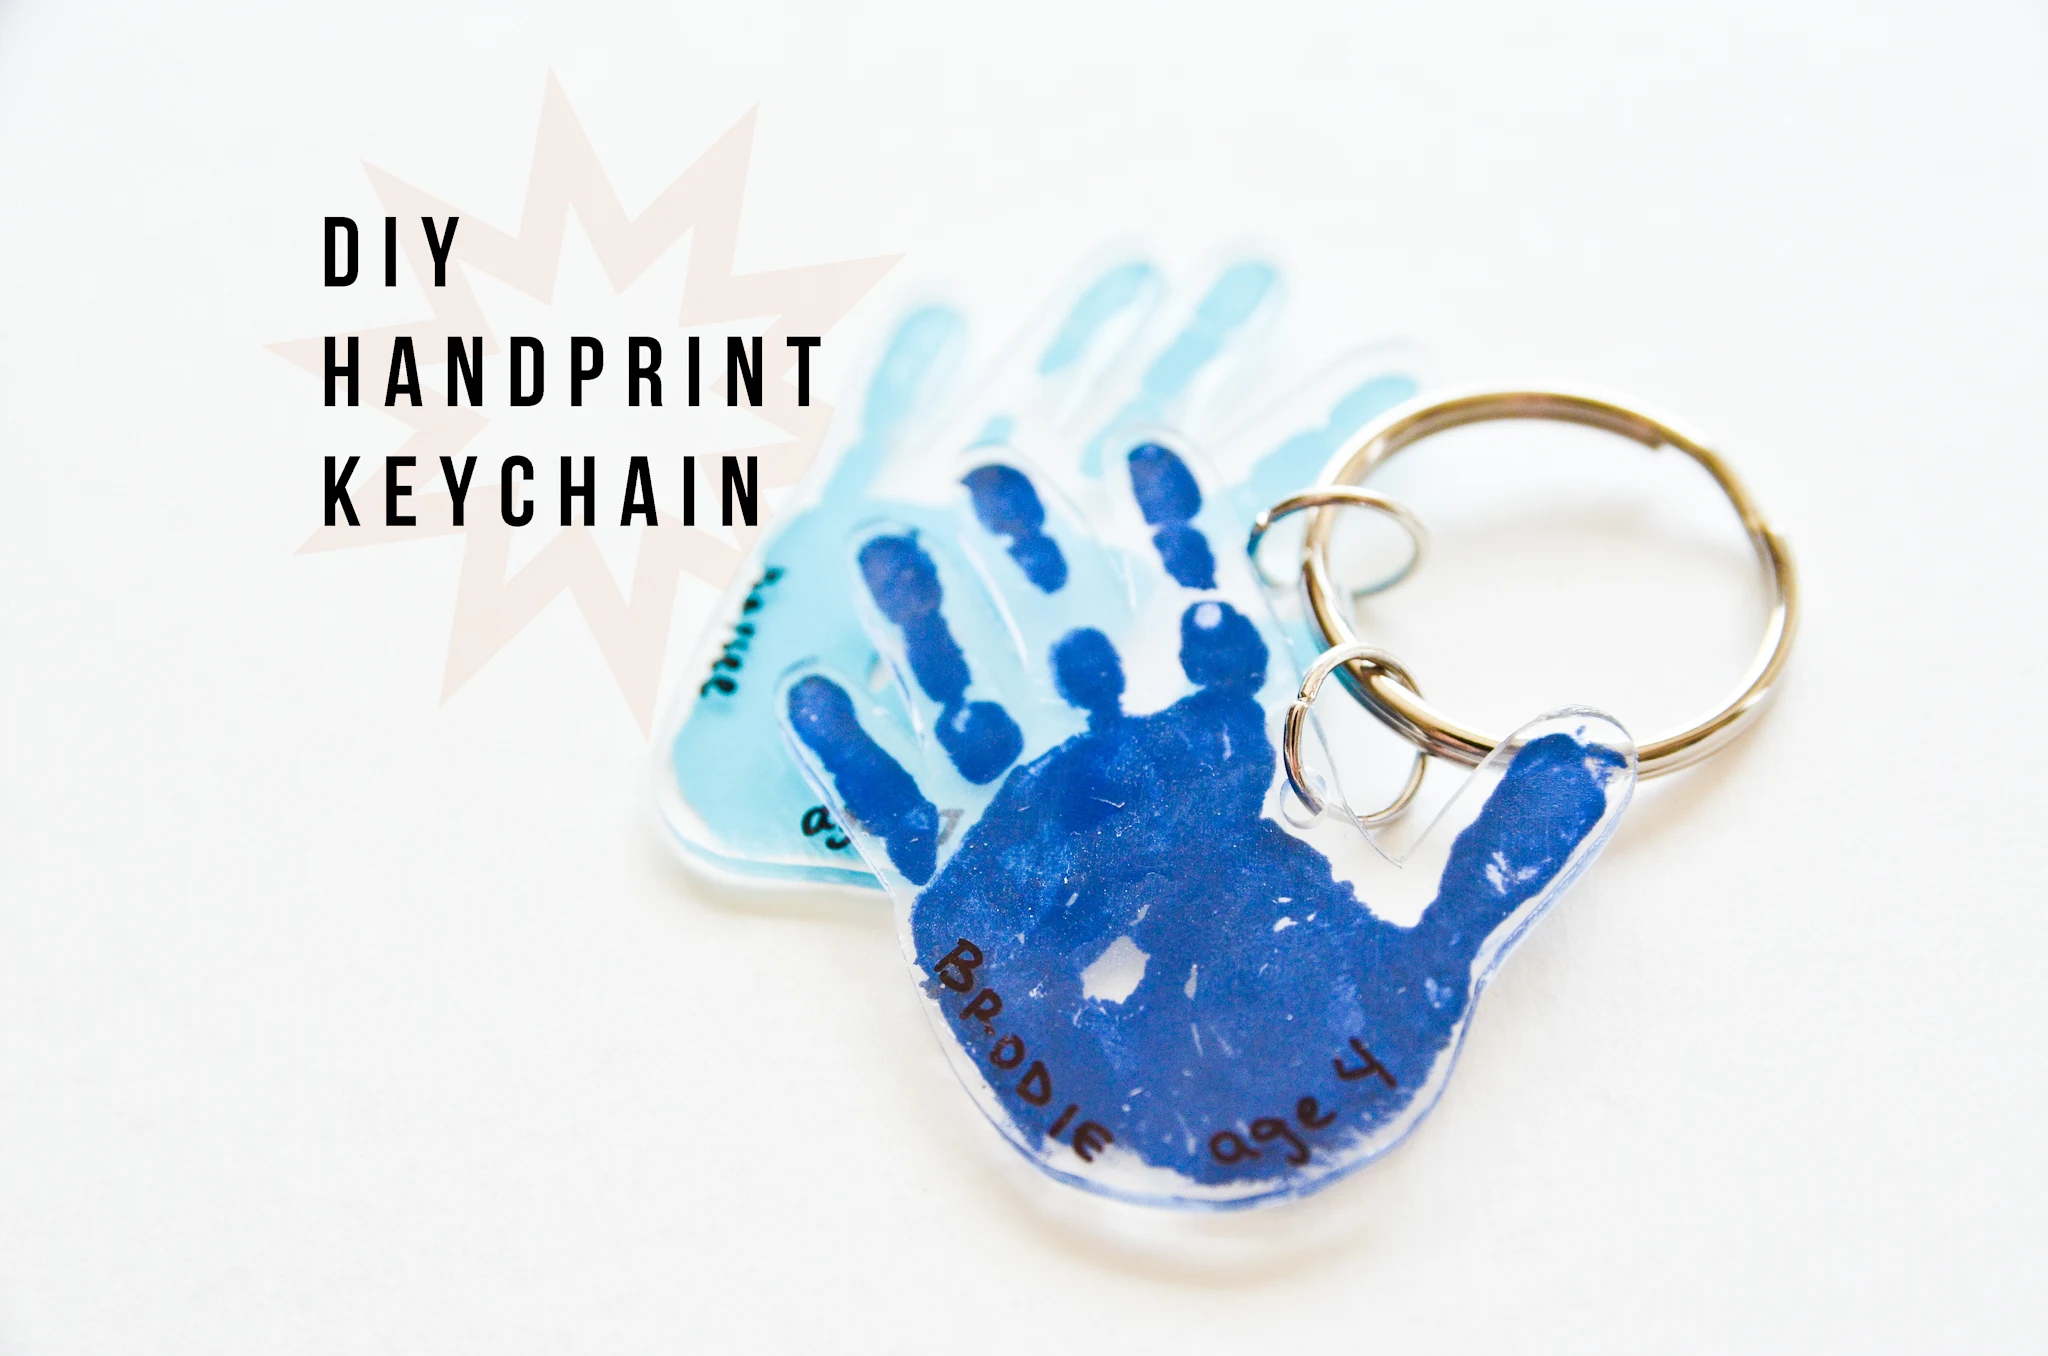 Child's Hand Keychains - Your Everyday Family